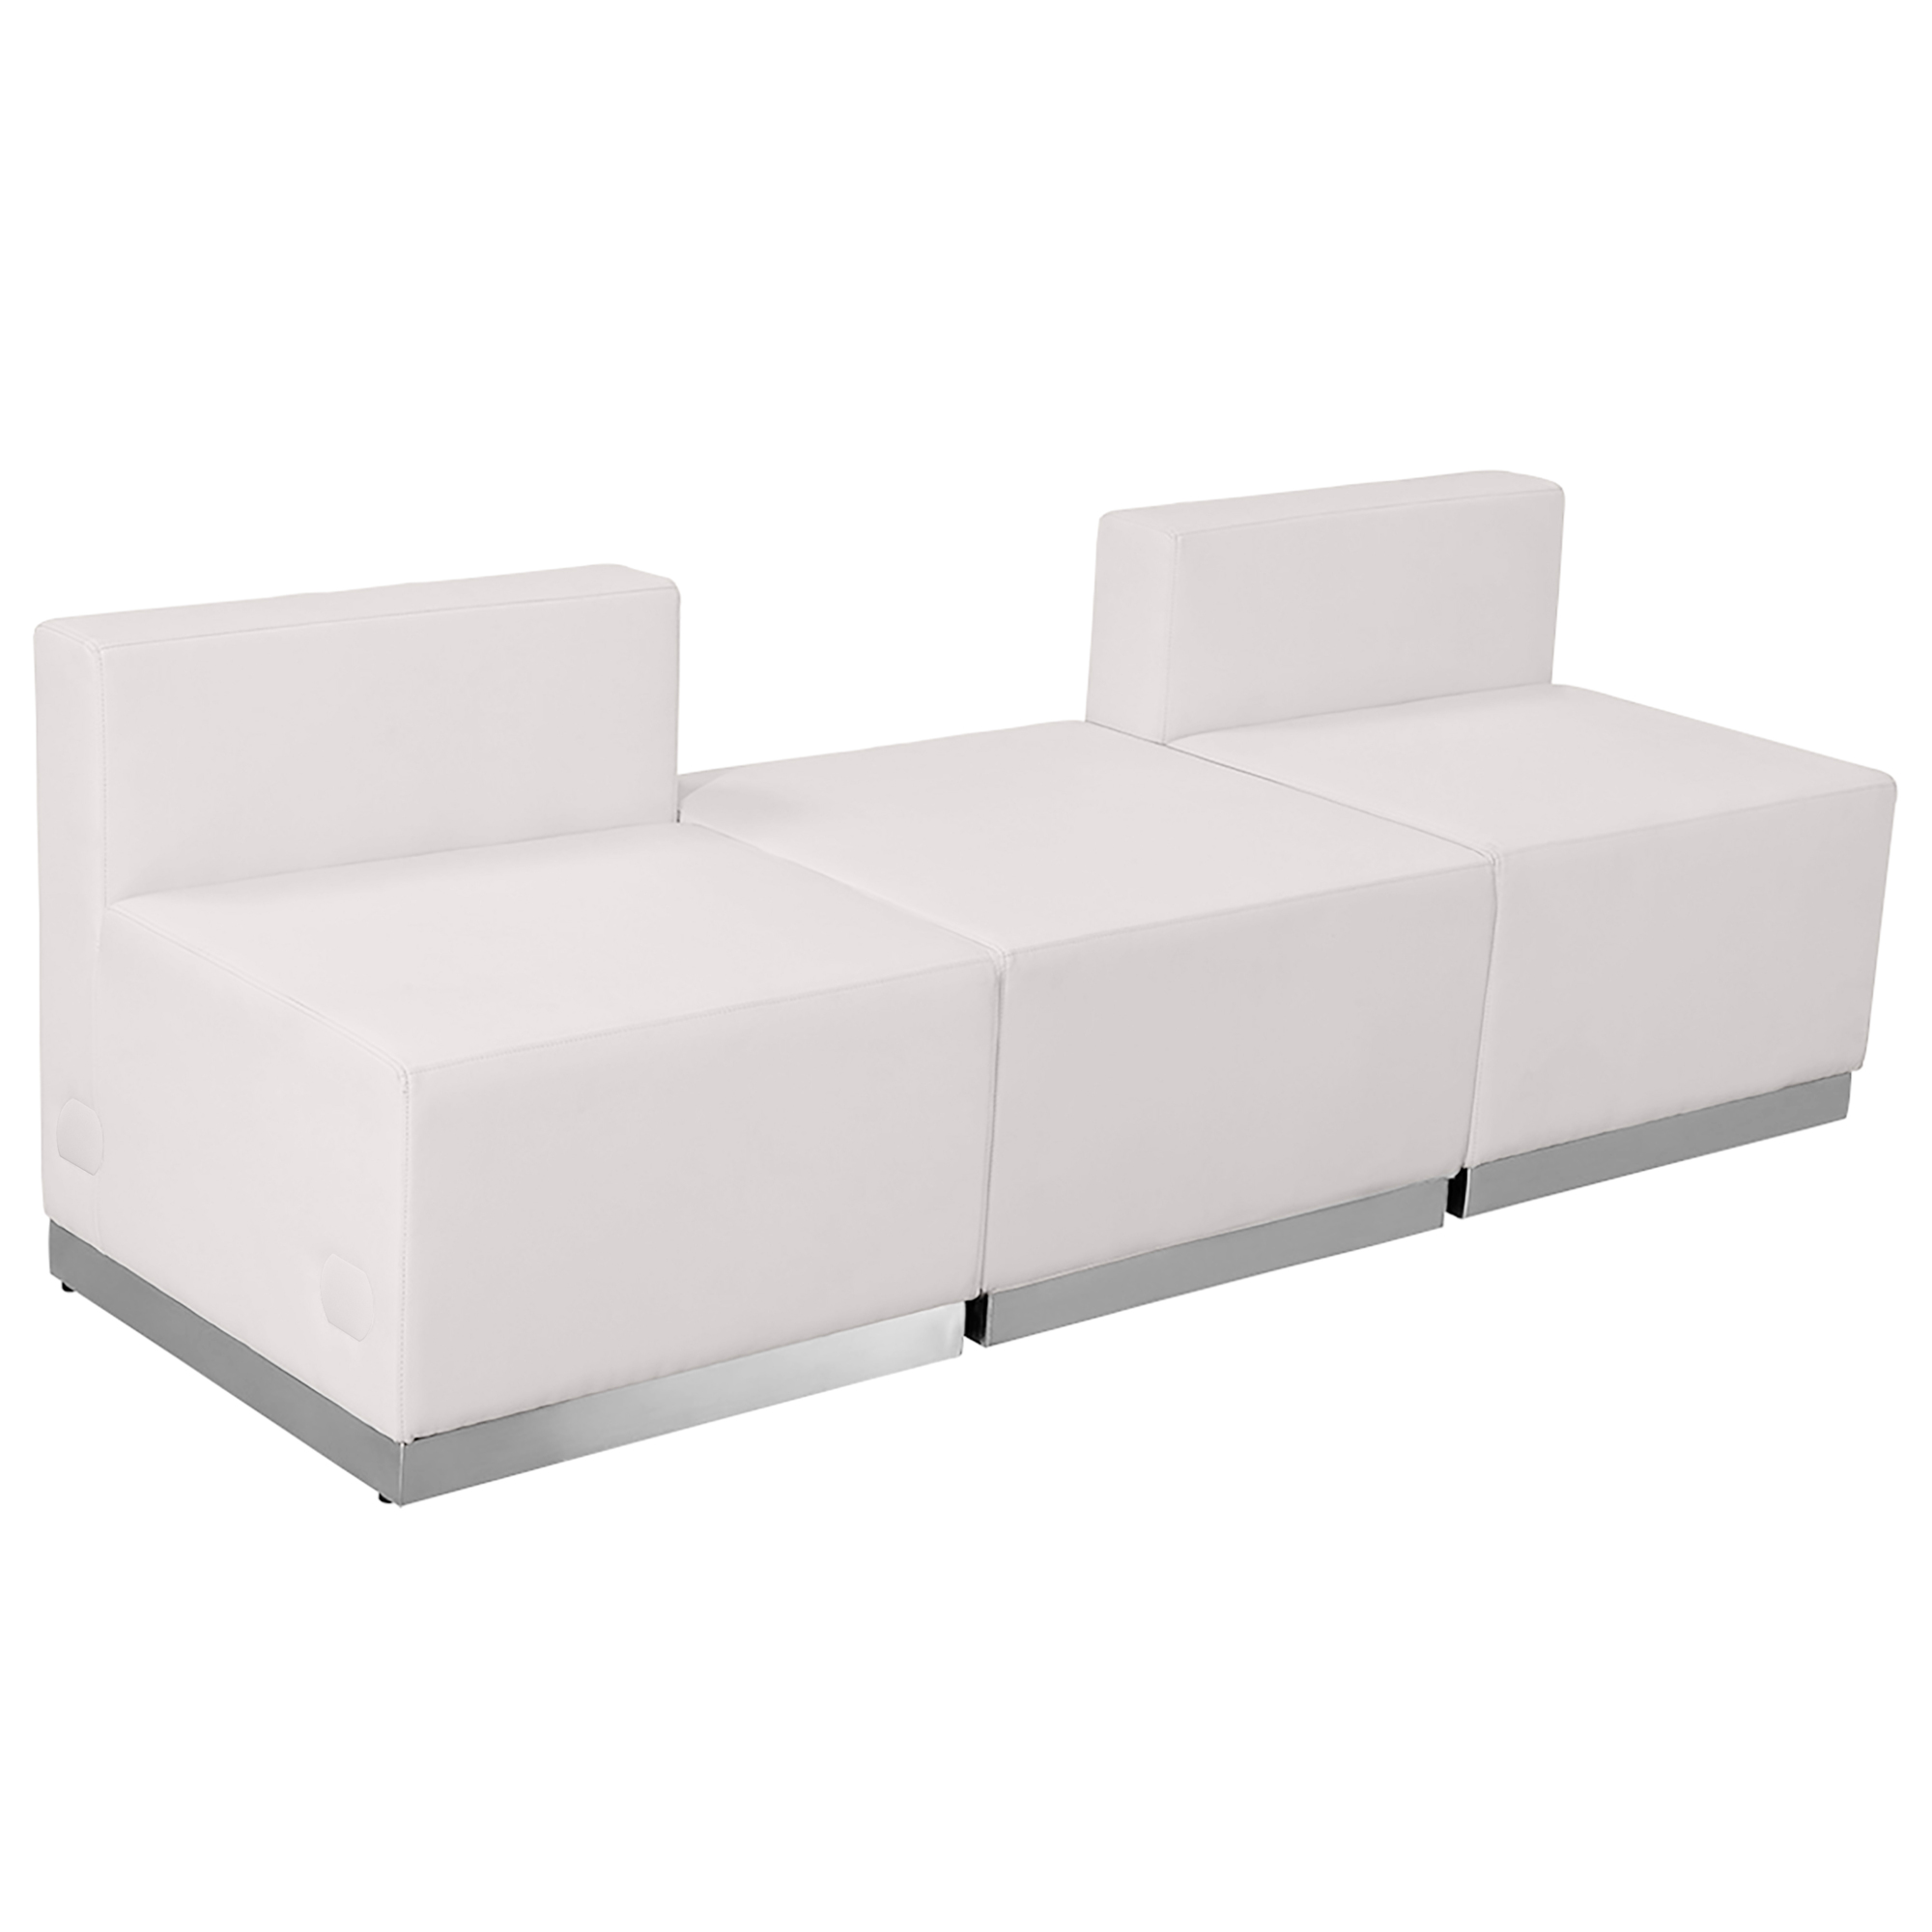 Flash Furniture, 3 PC White LeatherSoft Reception Configuration, Primary Color White, Included (qty.) 3, Model ZB803670SWH